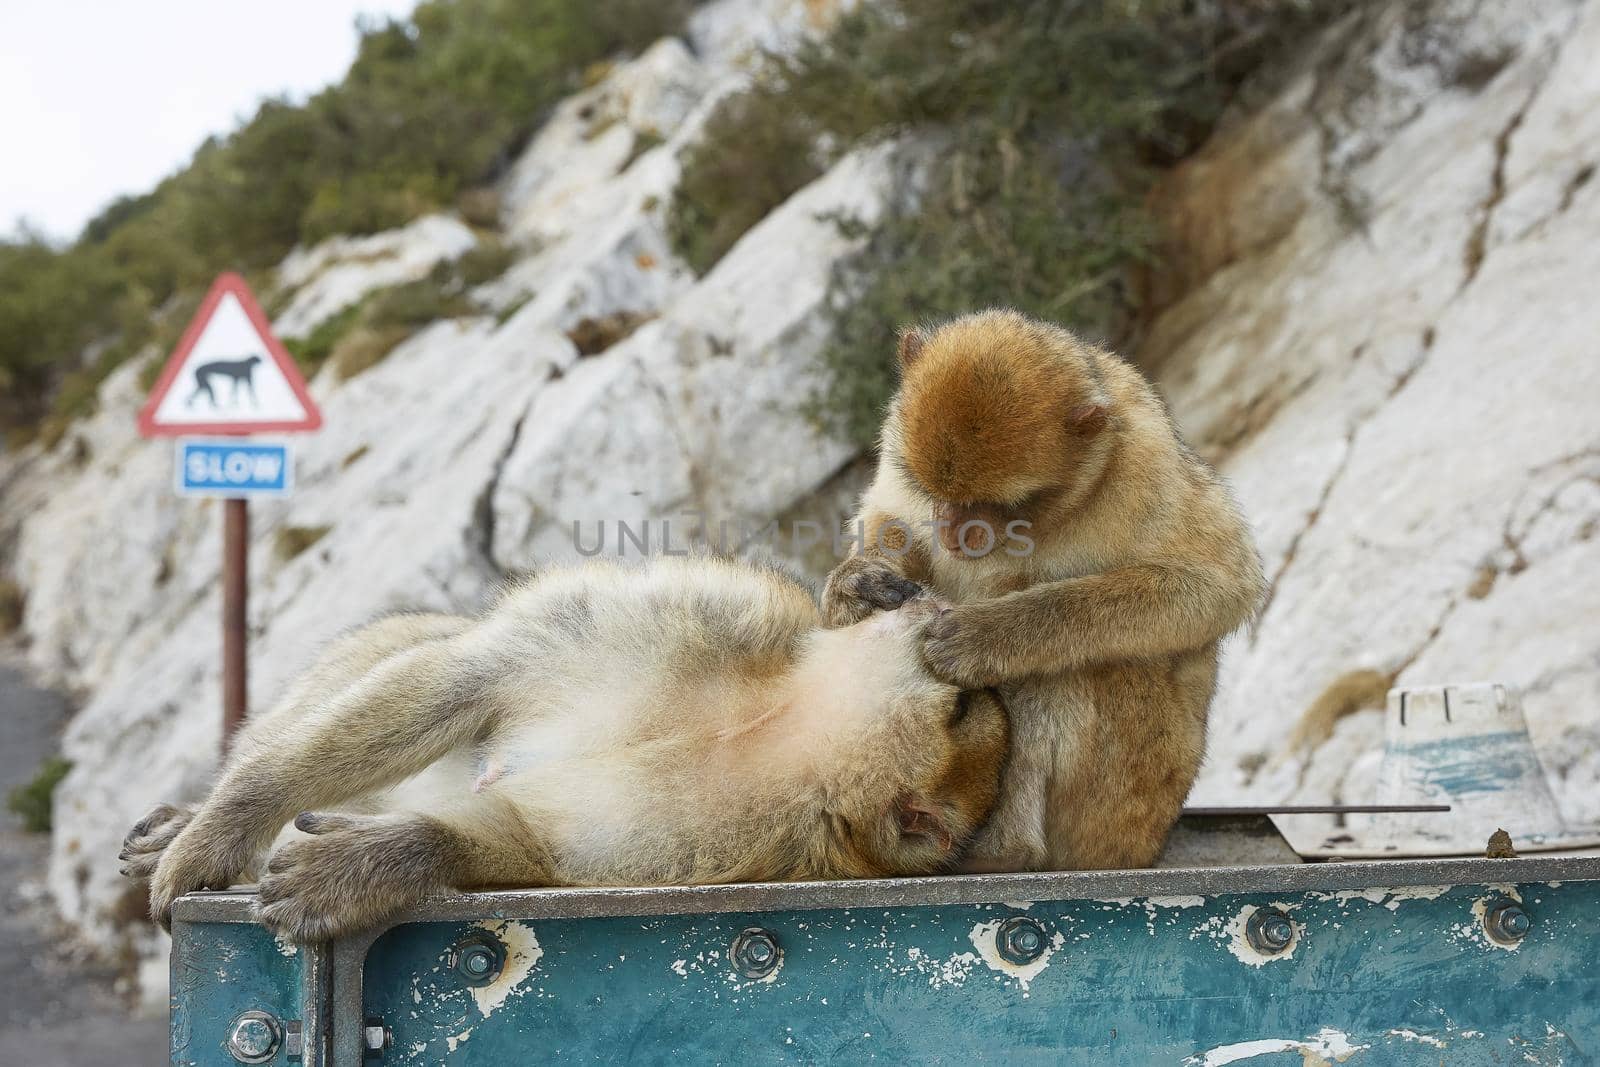 The Barbary Macaque monkeys of Gibraltar. The only wild monkey population on the European Continent. At present there are 300+ individuals in 5 troops occupying the Gibraltar nature reserve.
It is one of the most famous attractions of the British overseas territory.